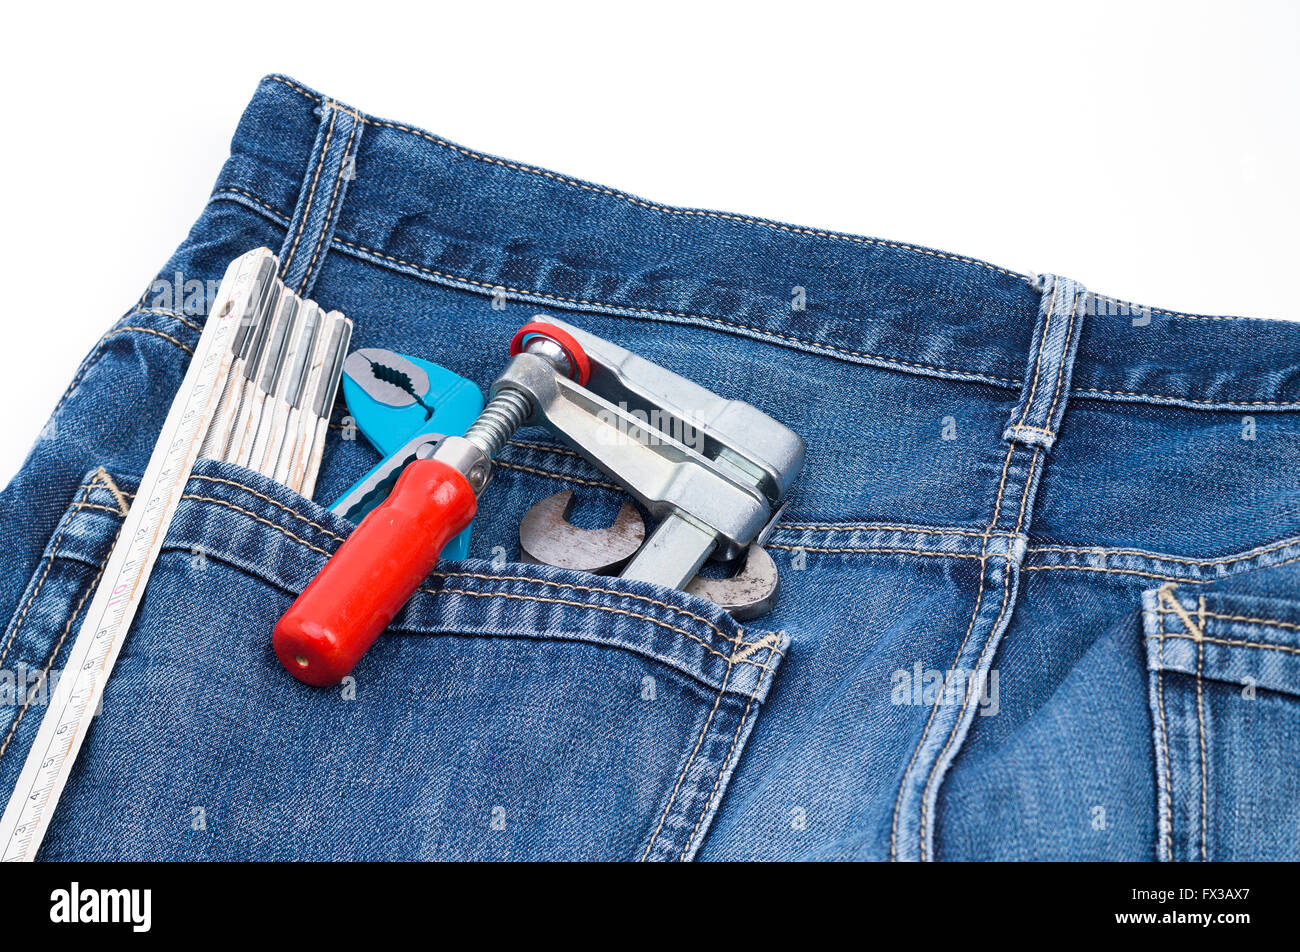 Image shows several tools in a jeans pocket Stock Photo